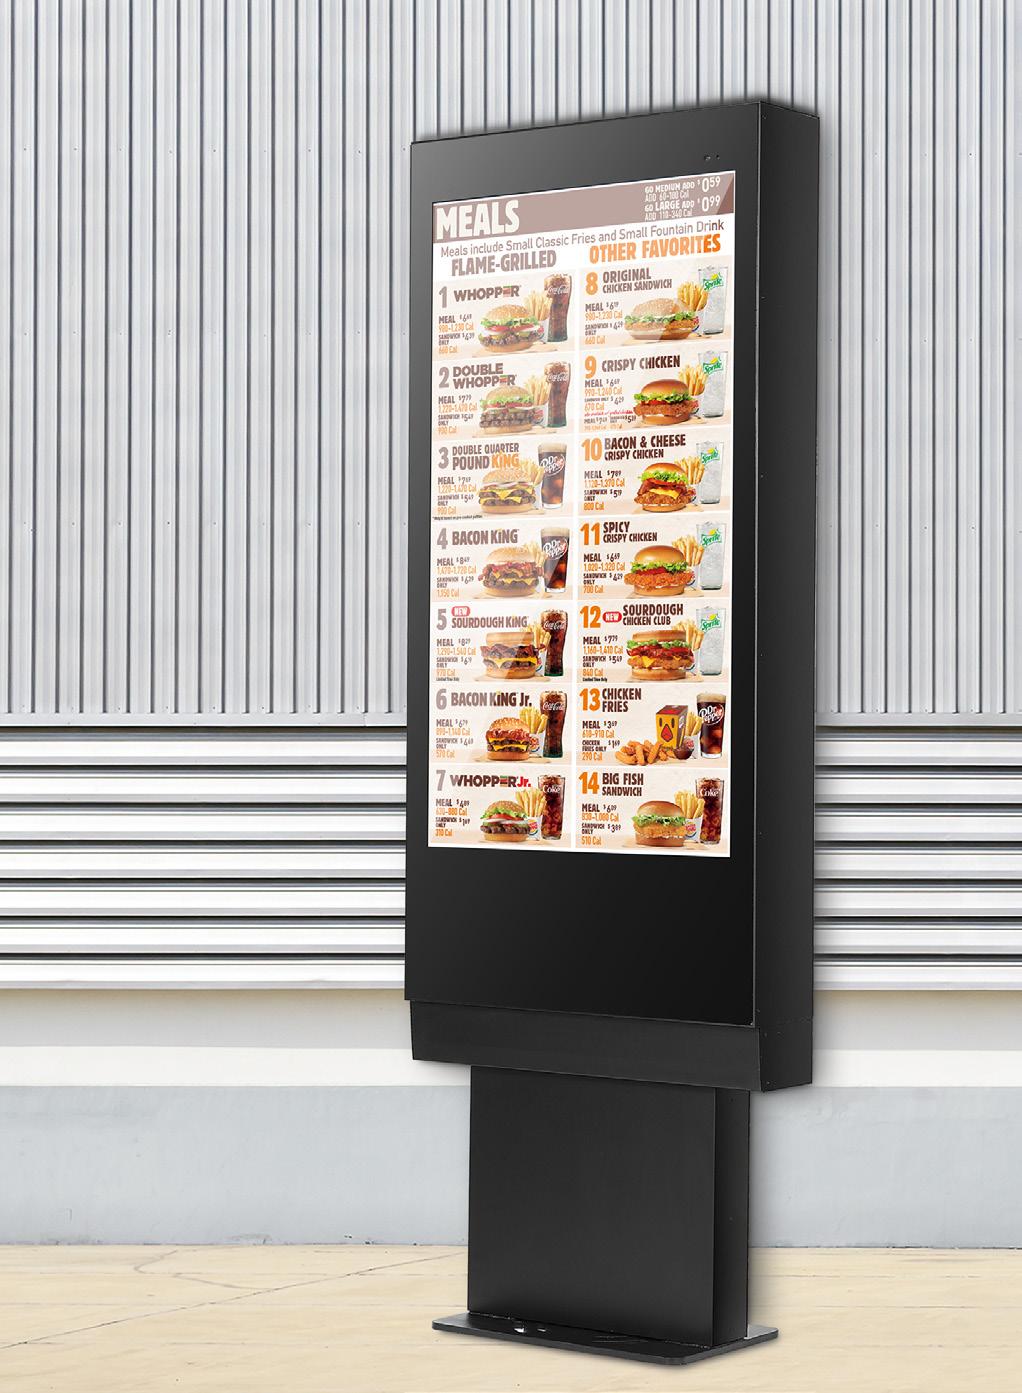 Effective Advertising Digital menu boards and promotional displays can deliver marketing messages efficiently and effectively and are more likely to grab